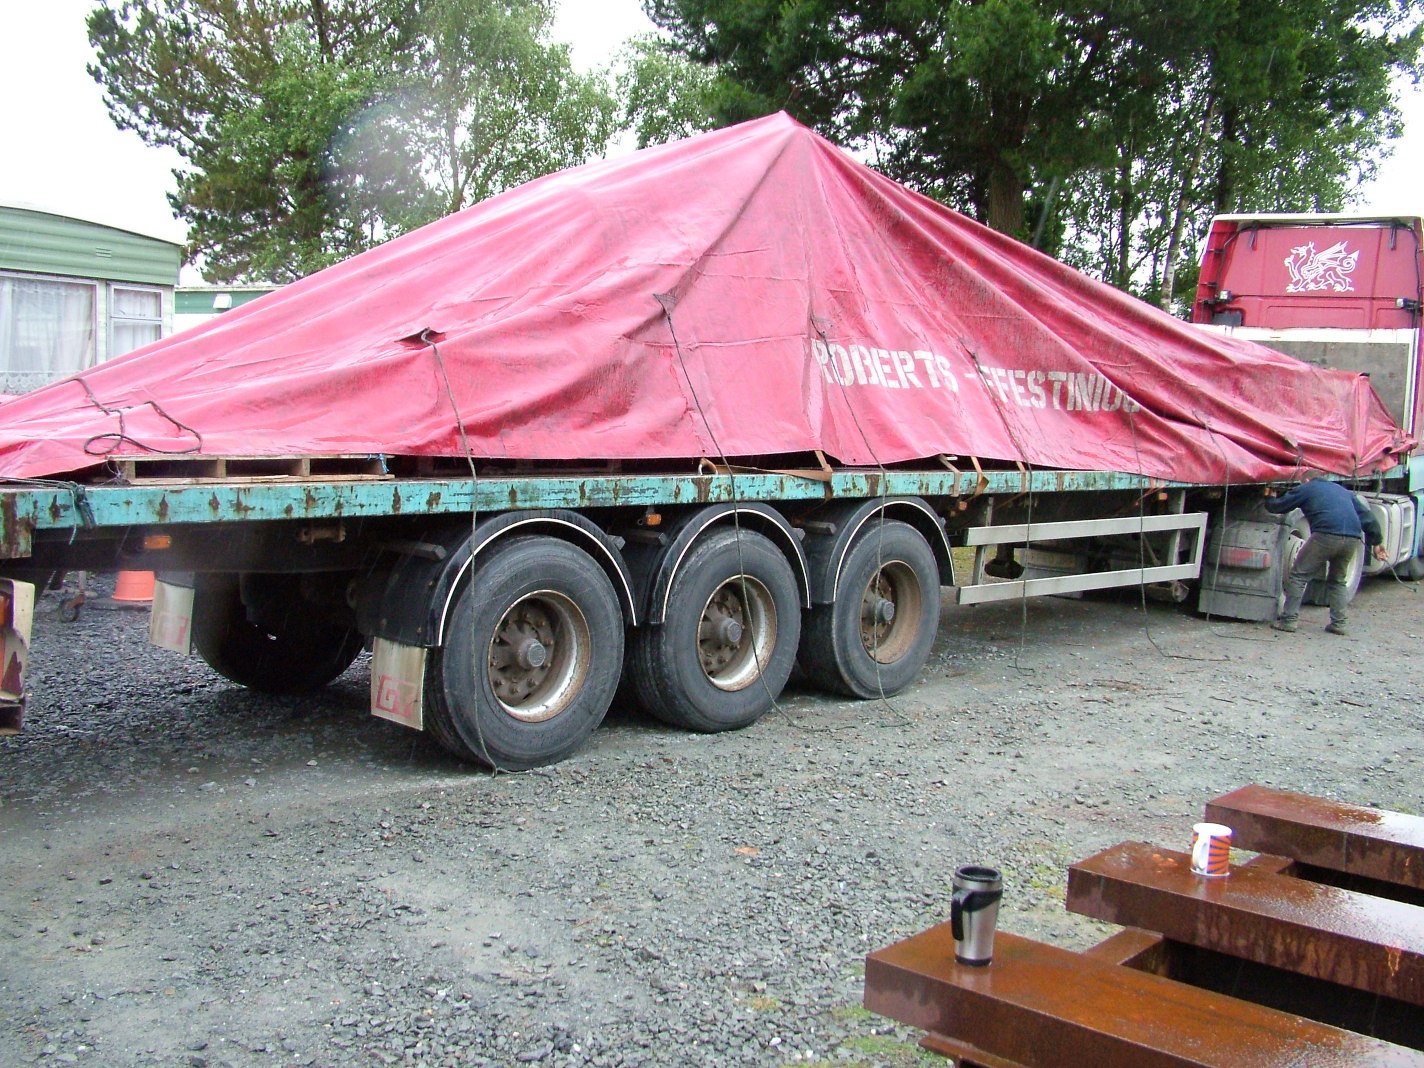 Roping & sheeting and ready to go to Alan Keef